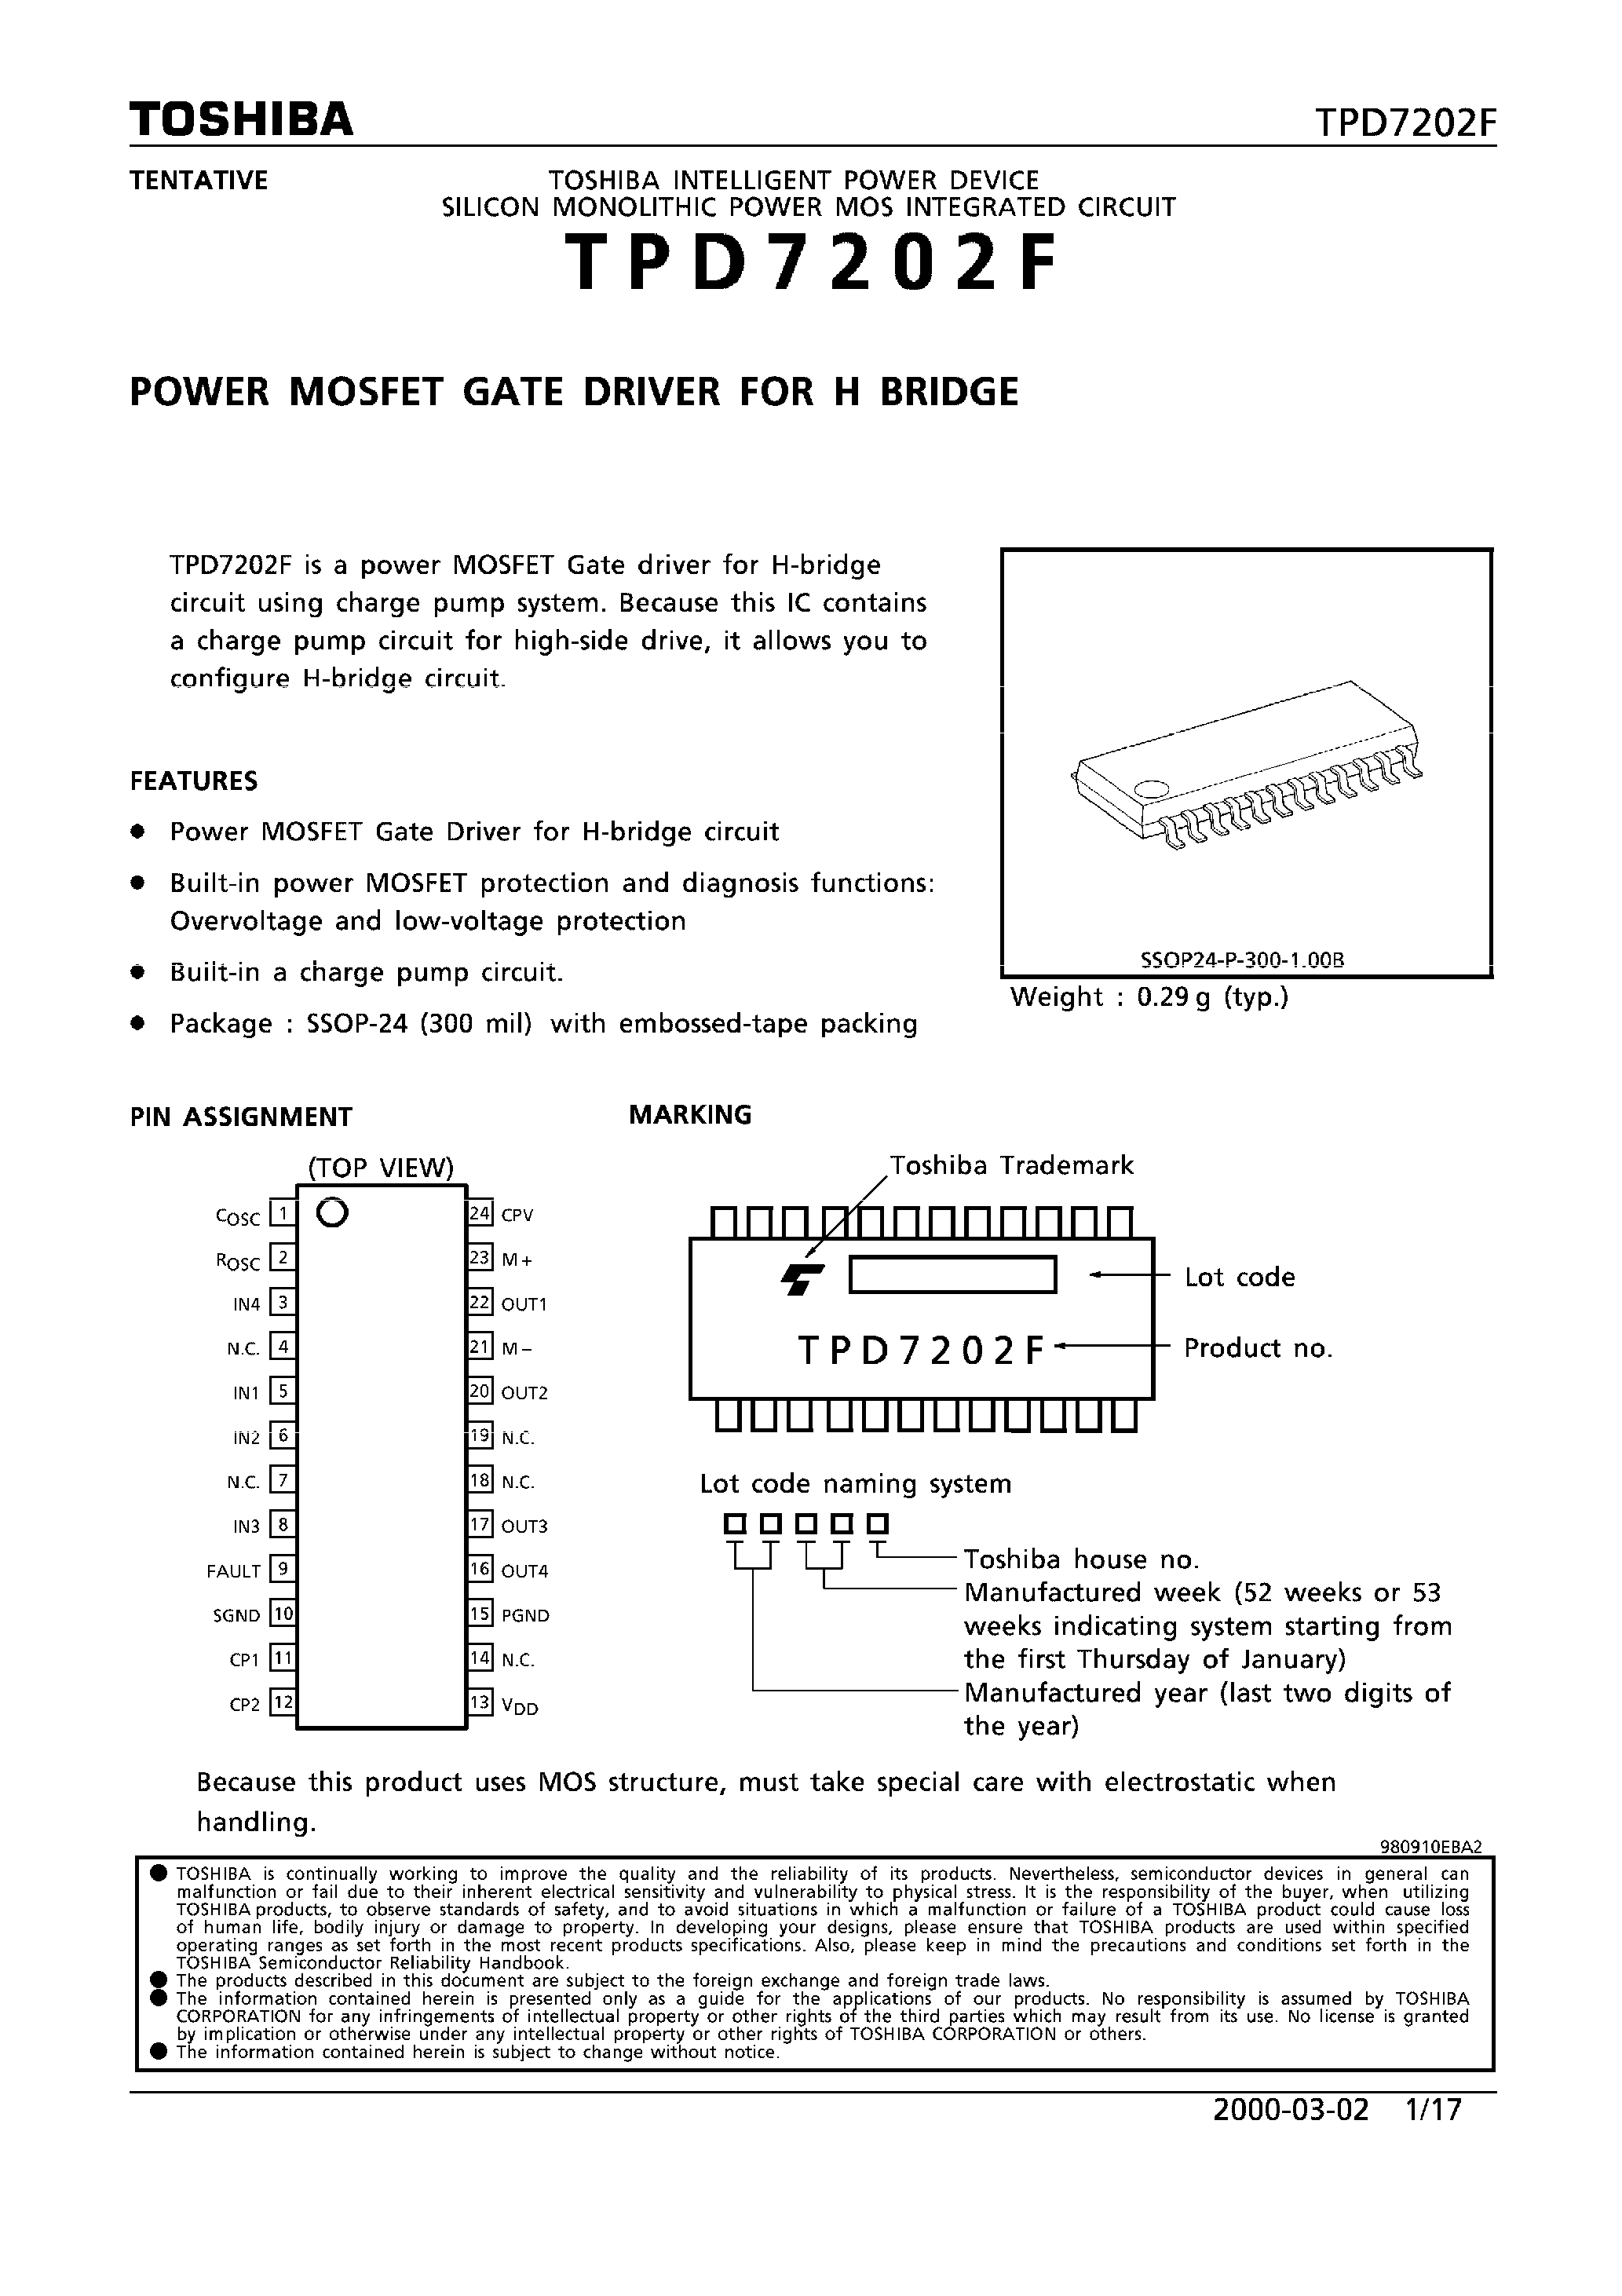 Datasheet TPD7202F - POWER MOSFET GATE DRIVER FOR H BRIDGE page 1